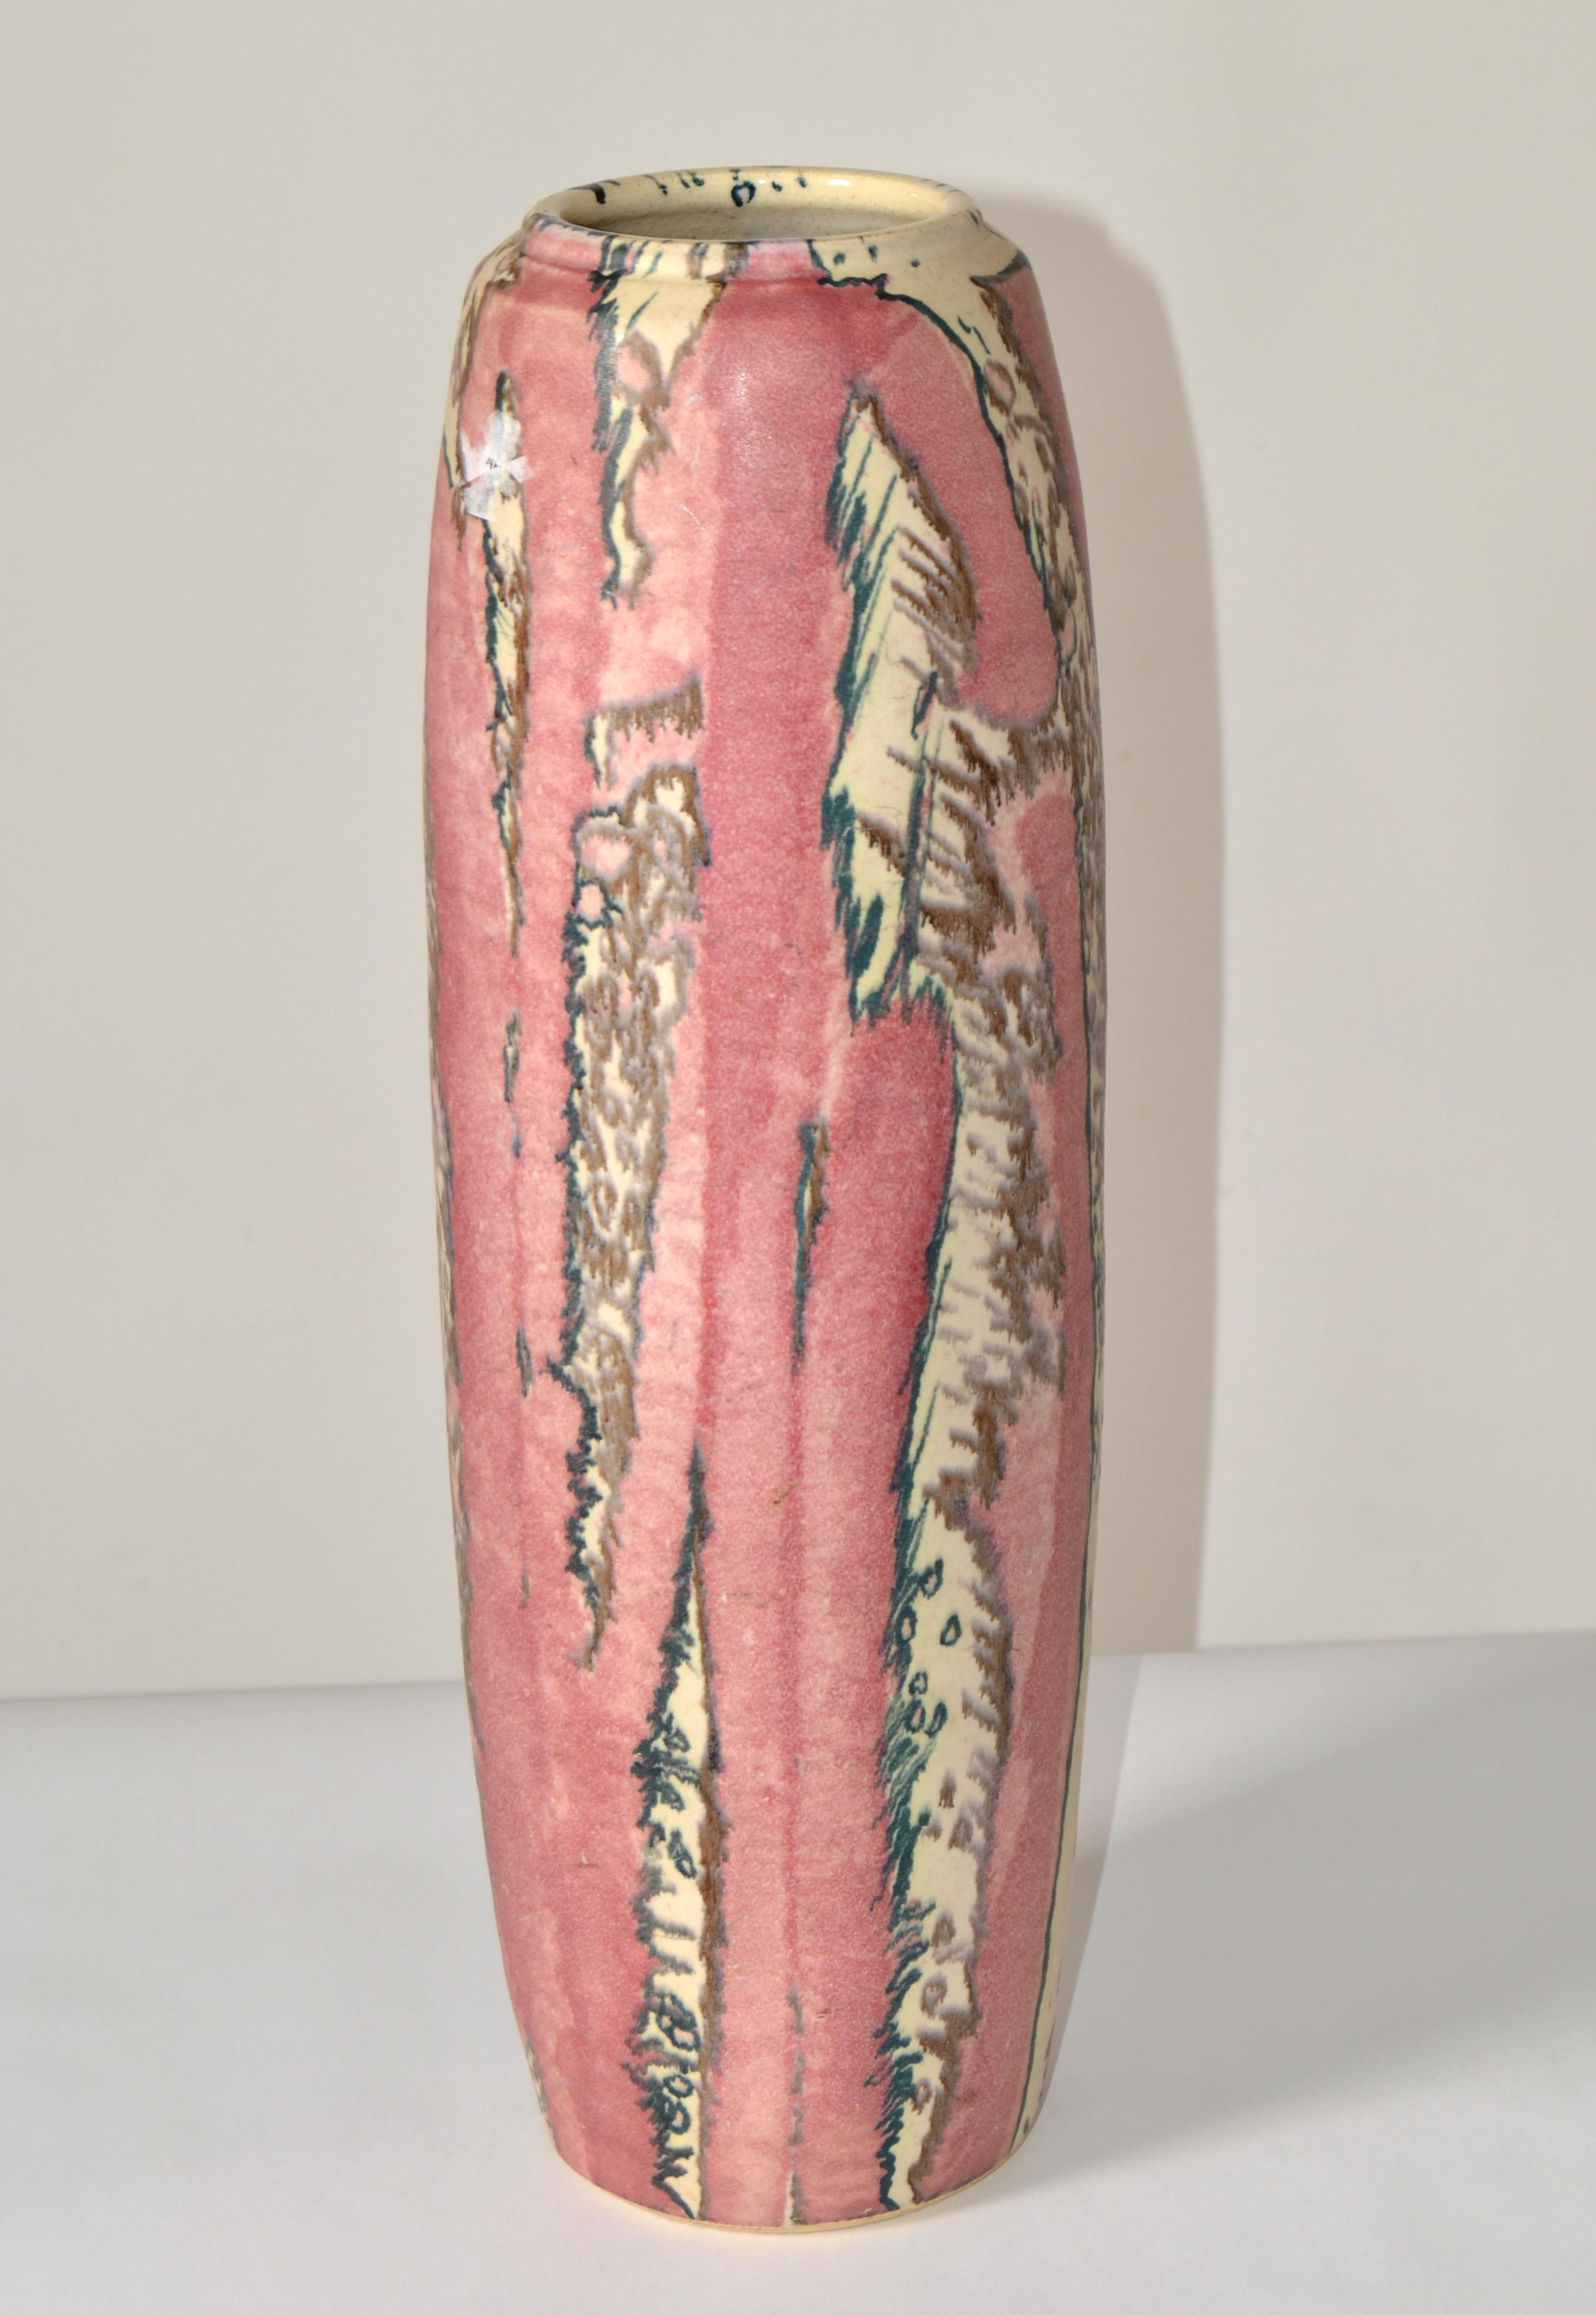 Signed tall Studio Piece Incised and Glazed Ceramic Vase in Pink, Slate Gray and Off-White Glaze.  
Mid-Century Modern Period Arts and Crafts Design with remarkable Venes and Lines.  
Signed by the Unknown Artist.
Opening is large enough to fit a